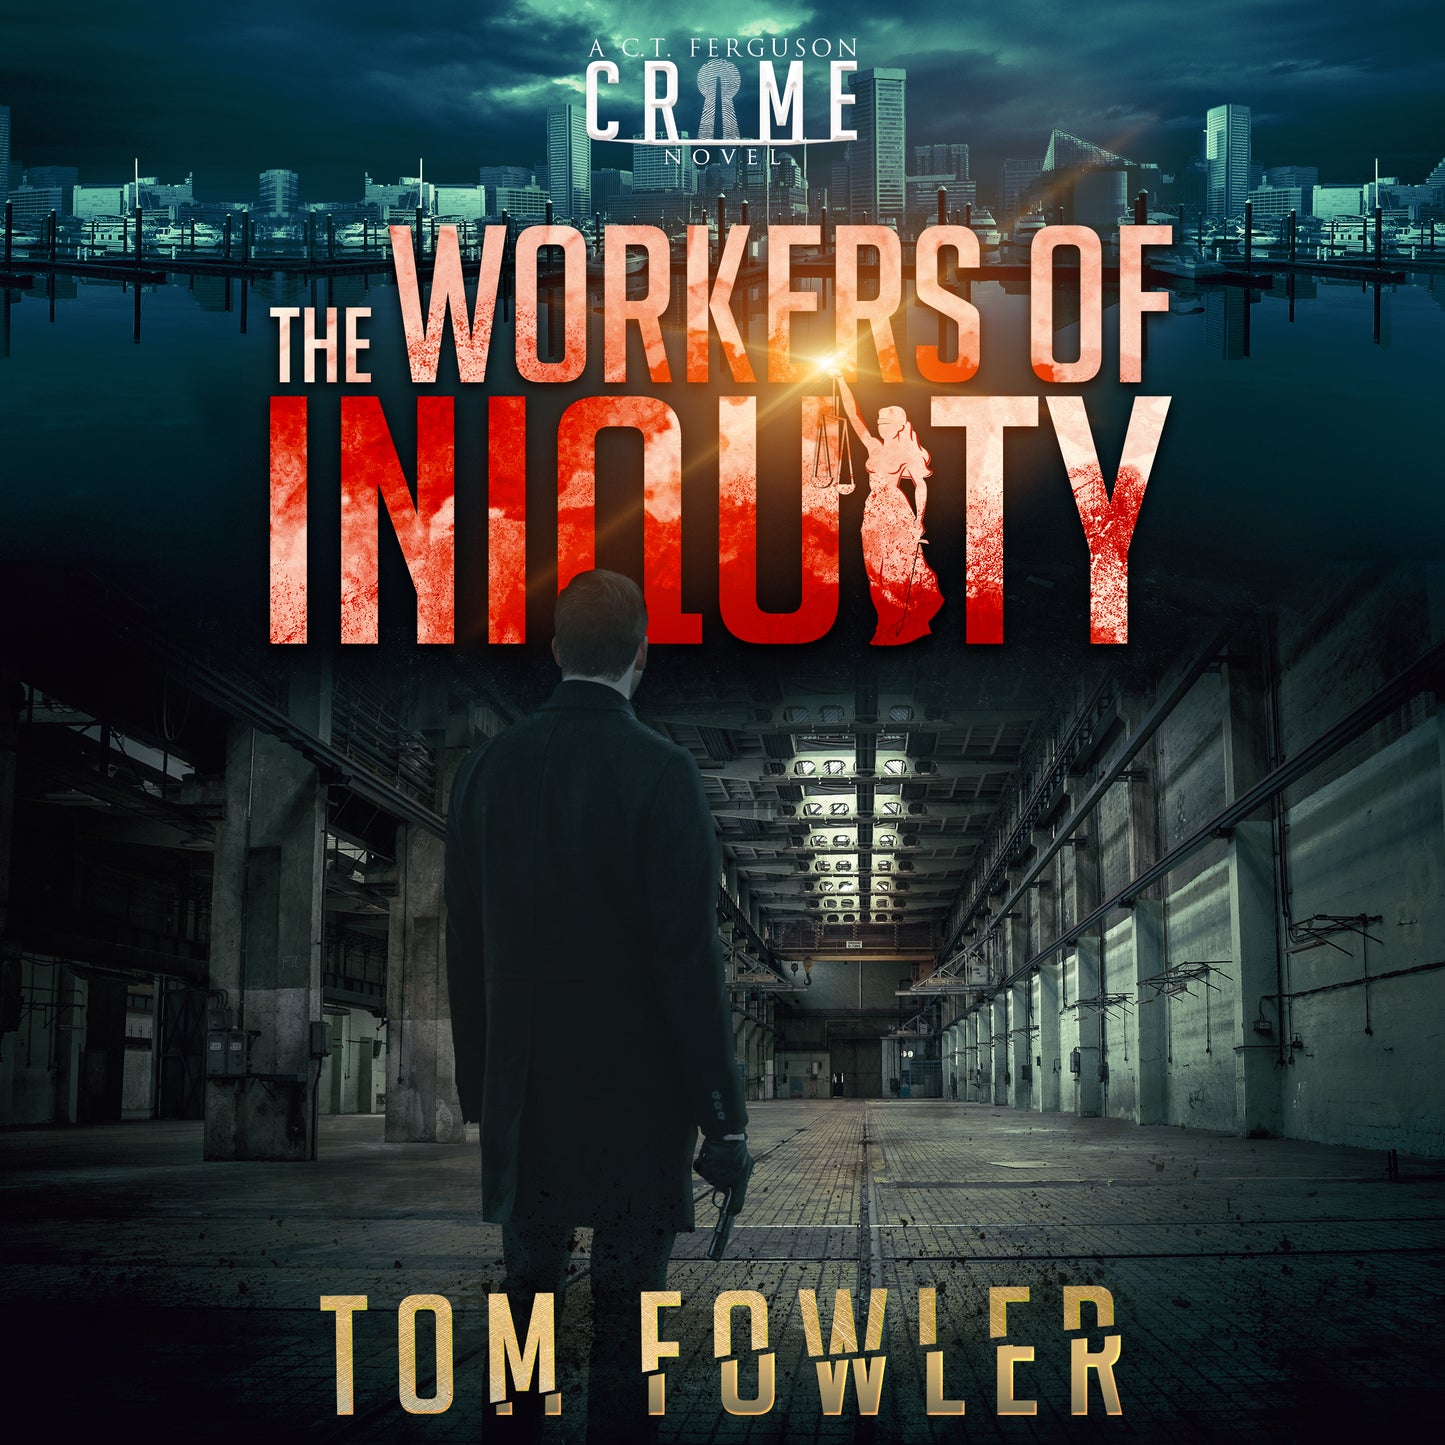 The Workers of Iniquity: A C.T. Ferguson Crime Novel (Audiobook)